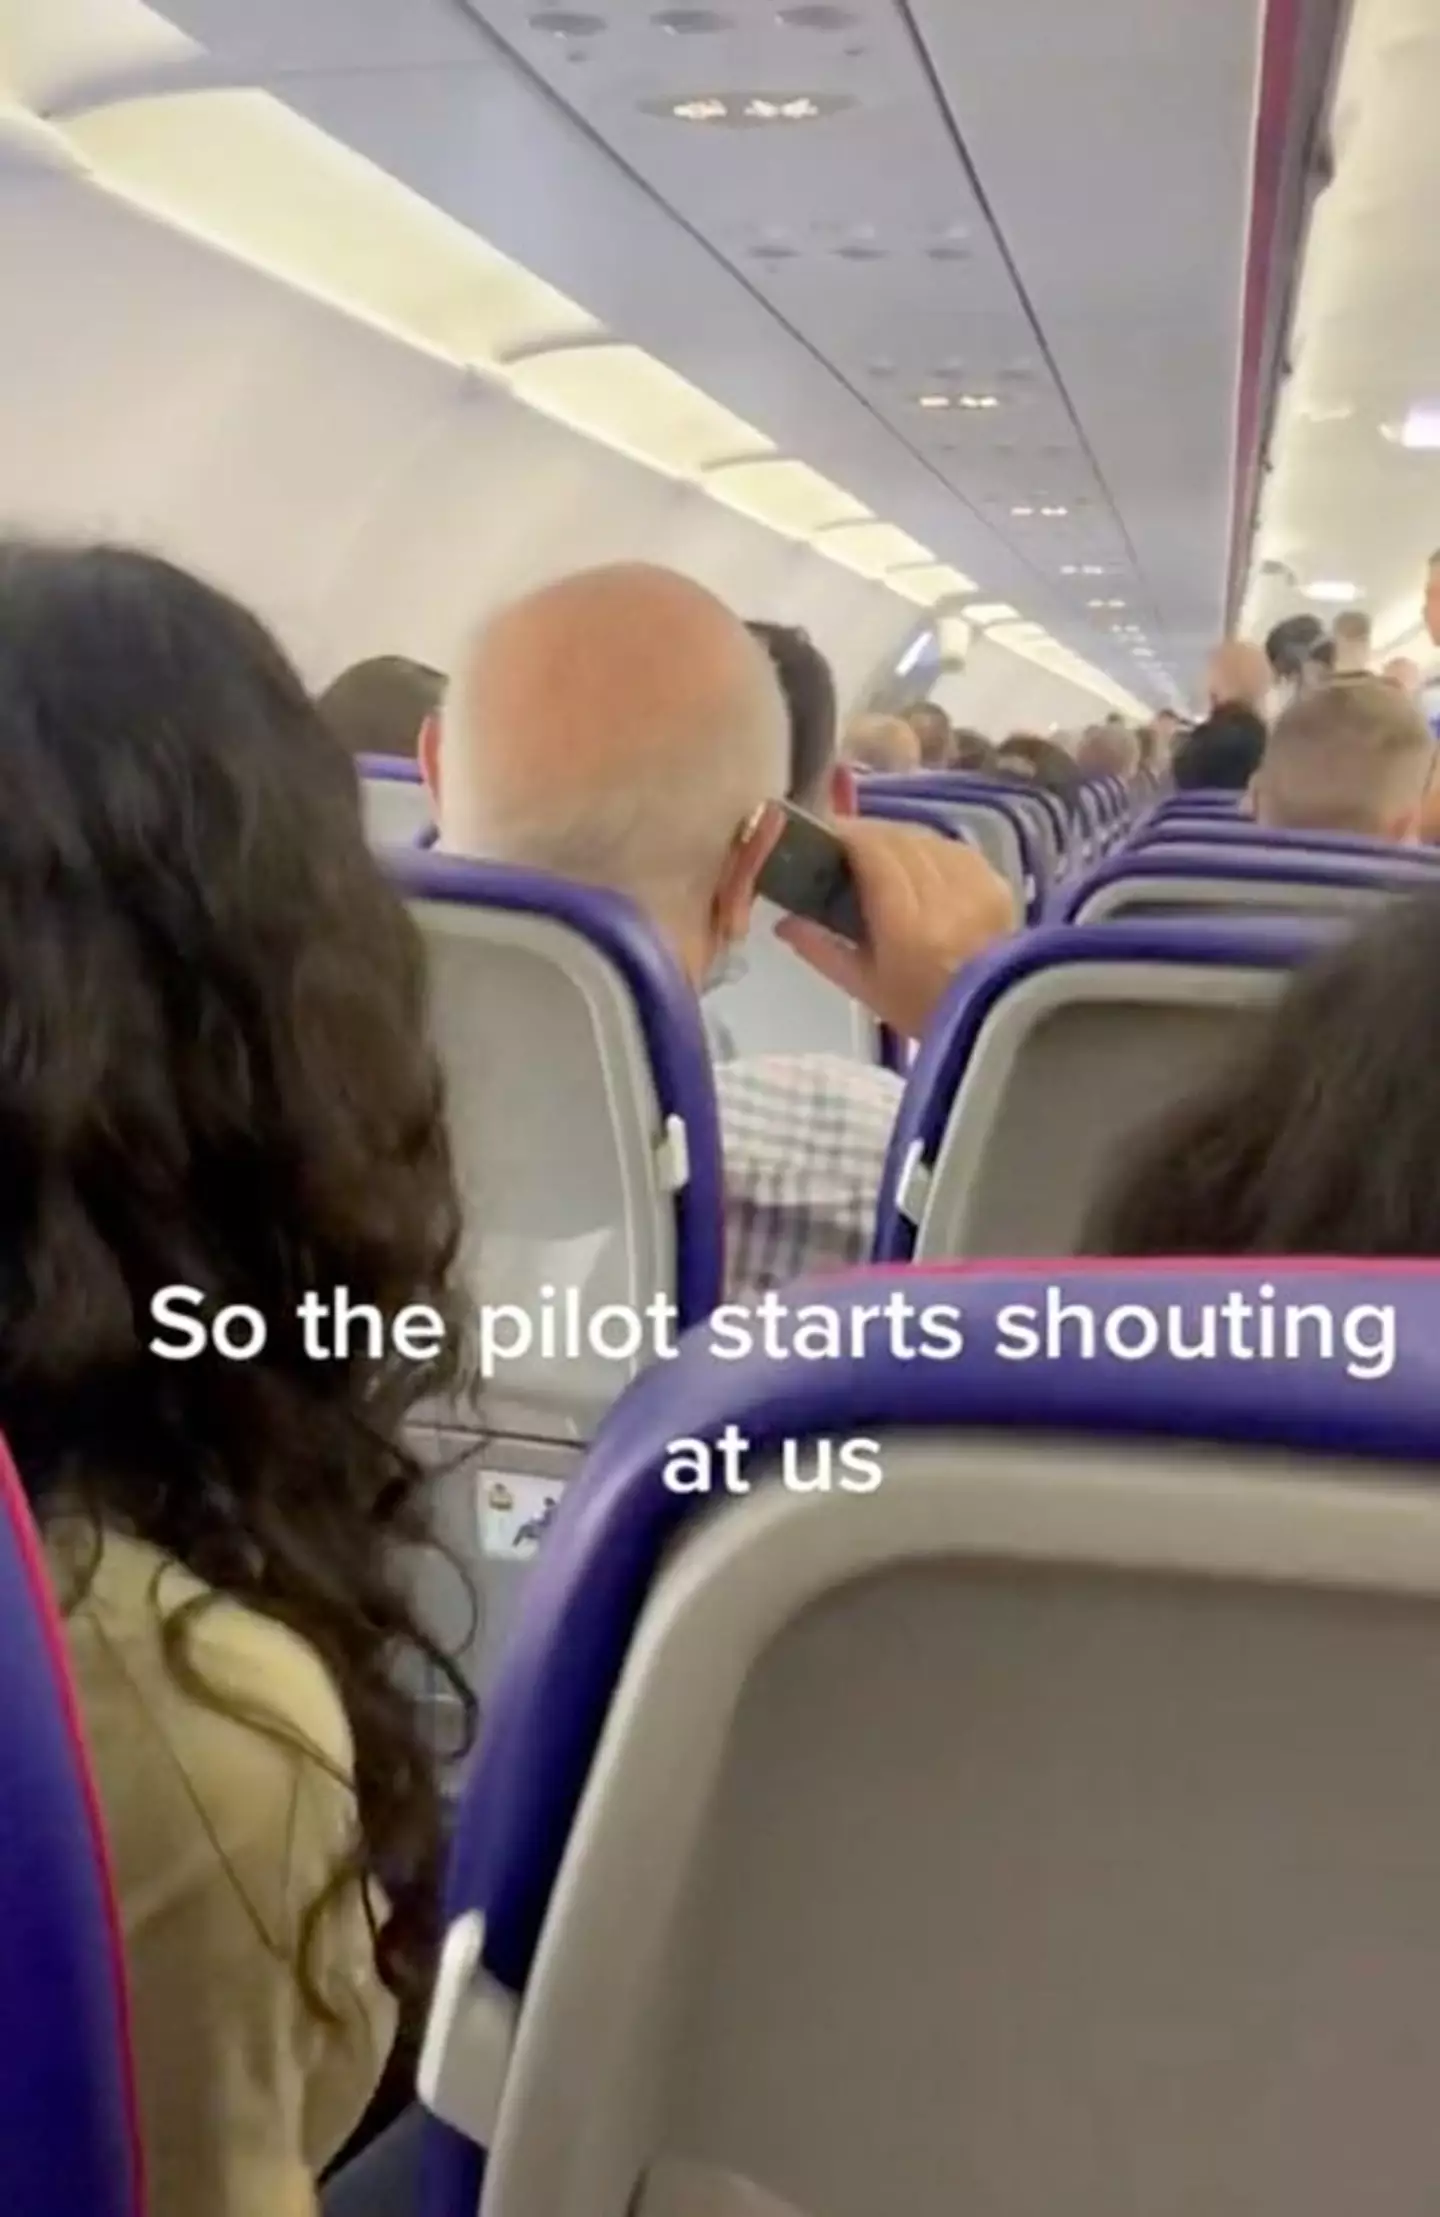 Passengers were stuck on the plane for seven hours.